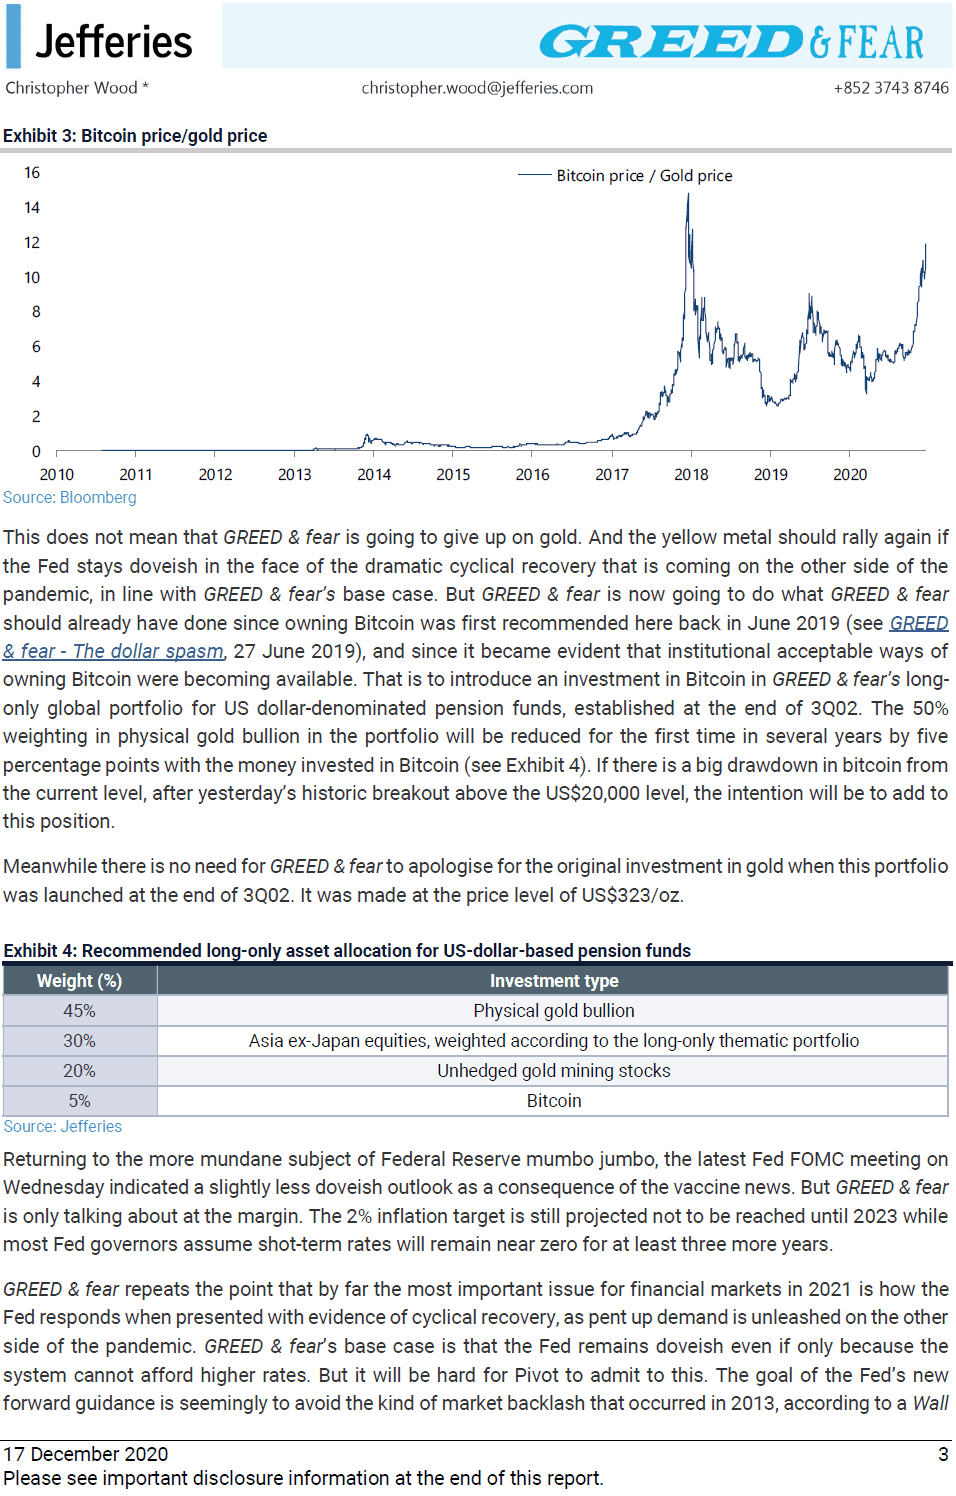 Greed and Fear investors note by Christopher Wood of Jefferies, Dec 2020